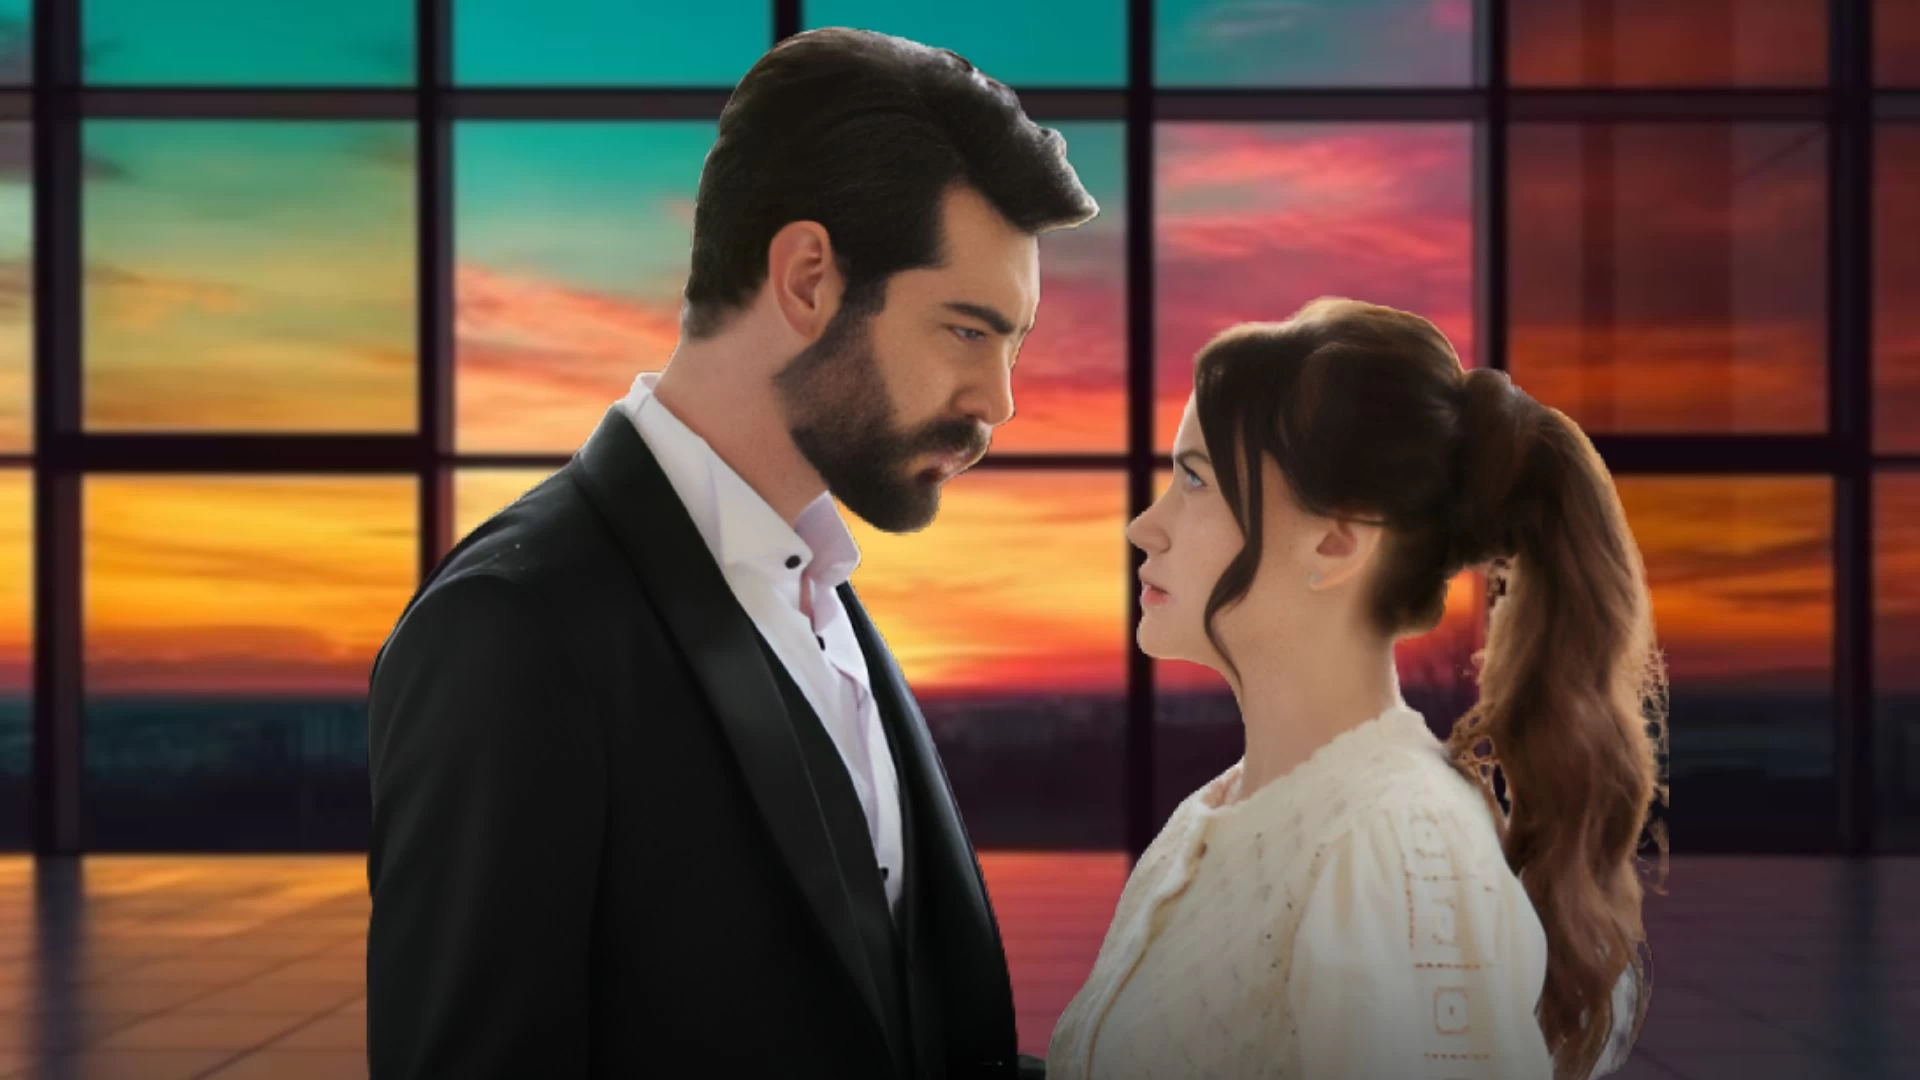 Kan Cicekleri Season 2 Episode 19 Release Date and Time, Countdown, When is it Coming Out?